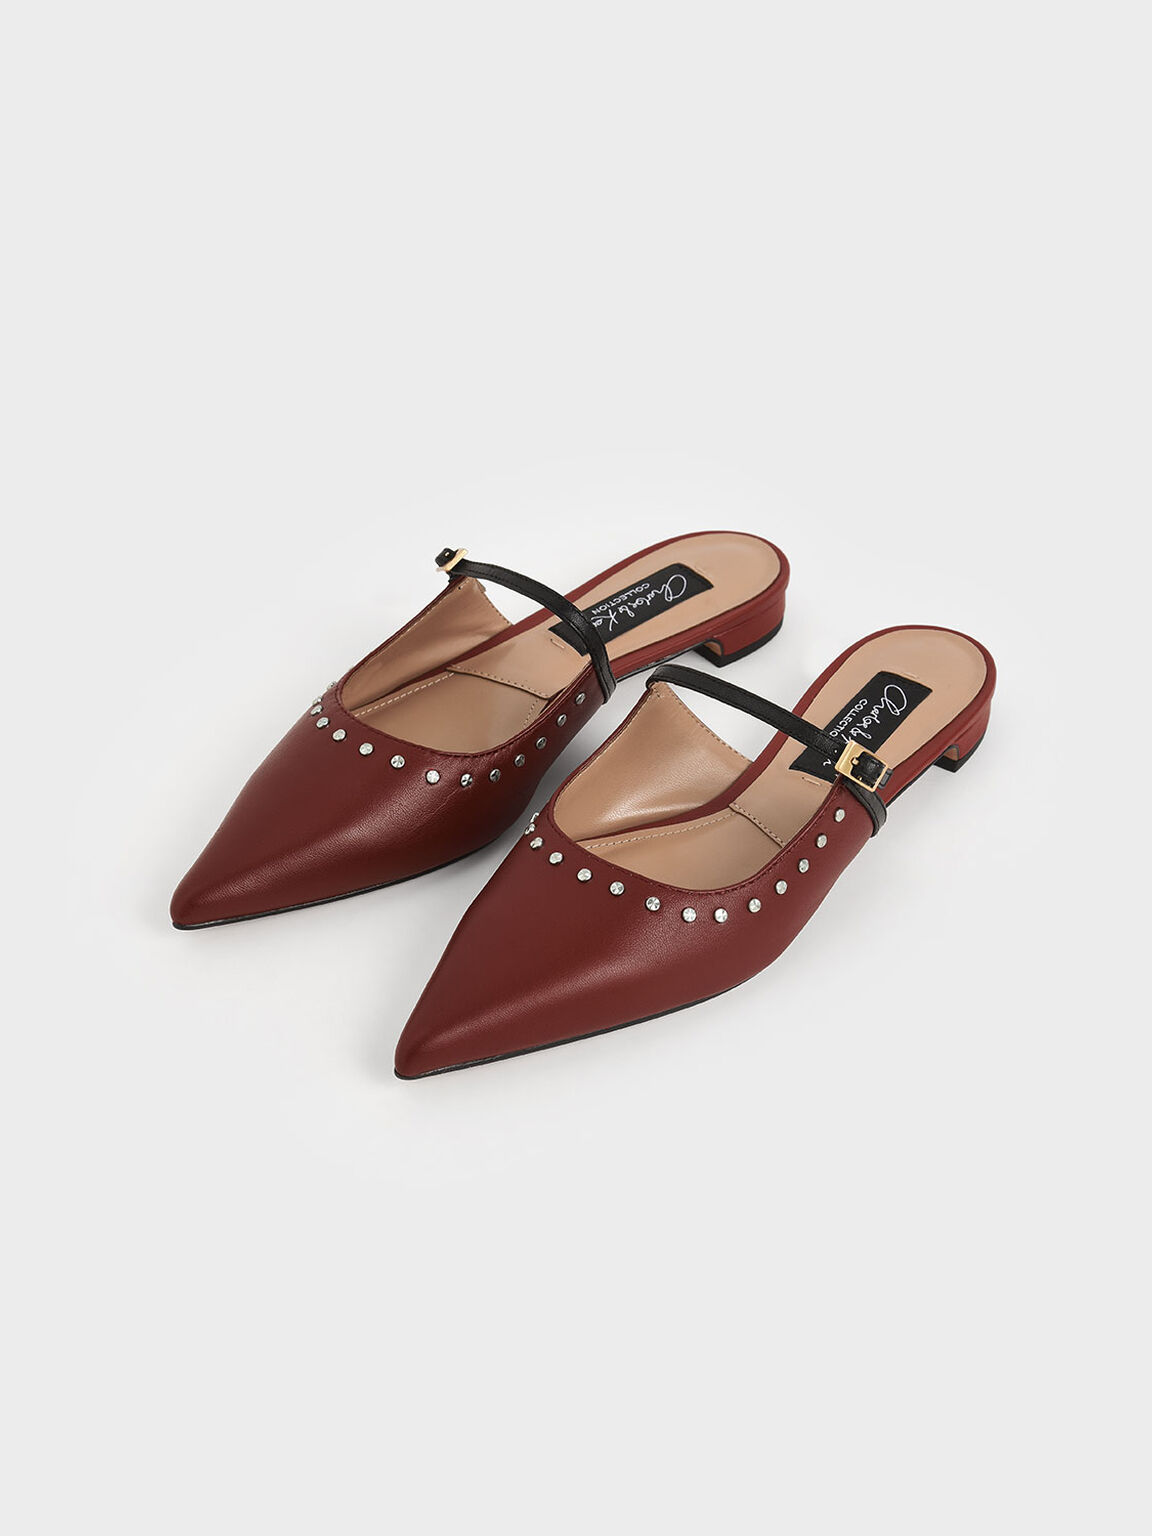 Studded Leather Mules, Brick, hi-res